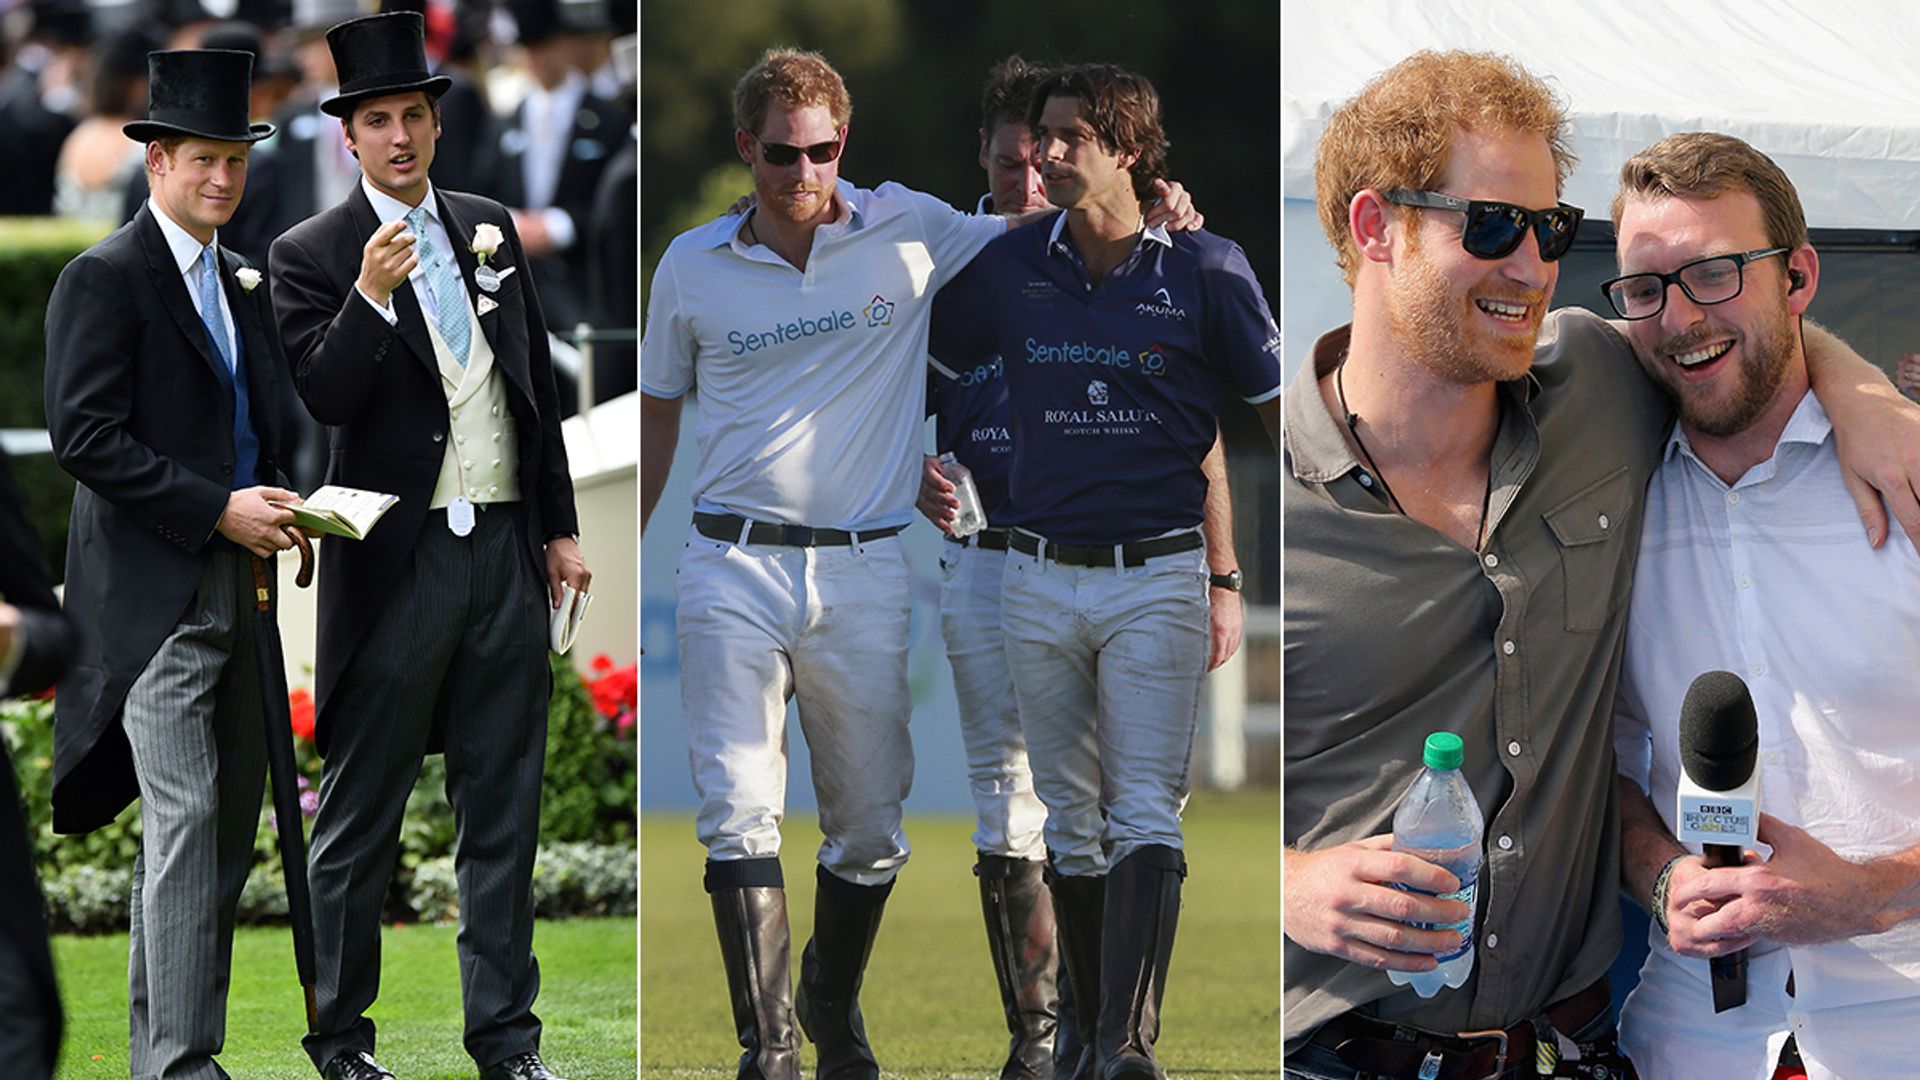 Prince Harry's squad of close friends - who is in his inner circle?